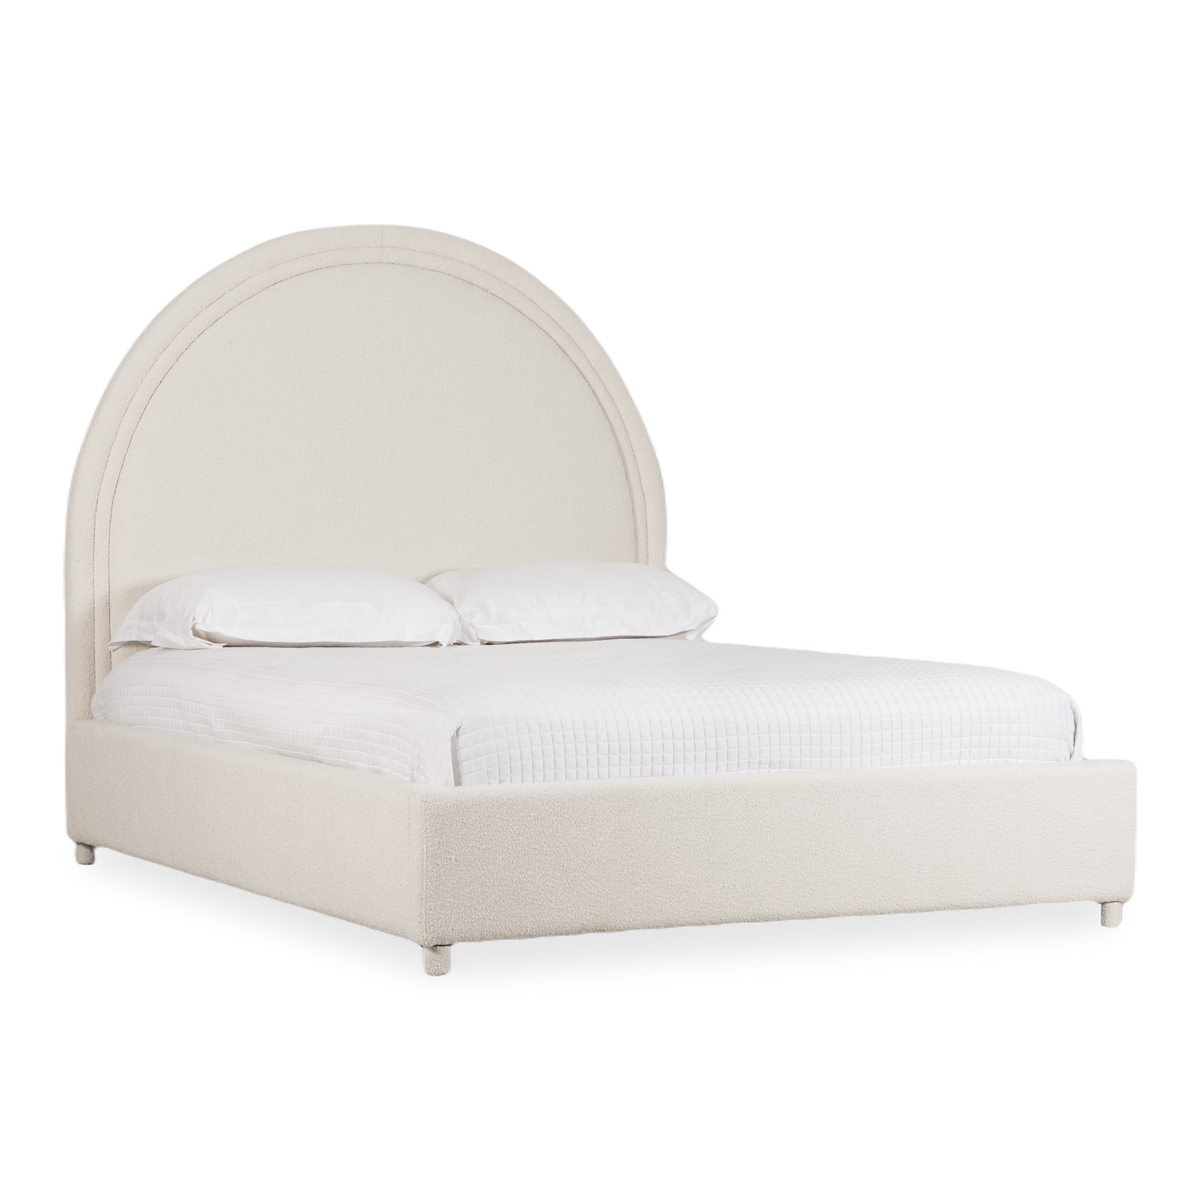 With its large half moon shaped headboard and rich boucle upholstered frame, the Curvo Bed is naturally inviting.